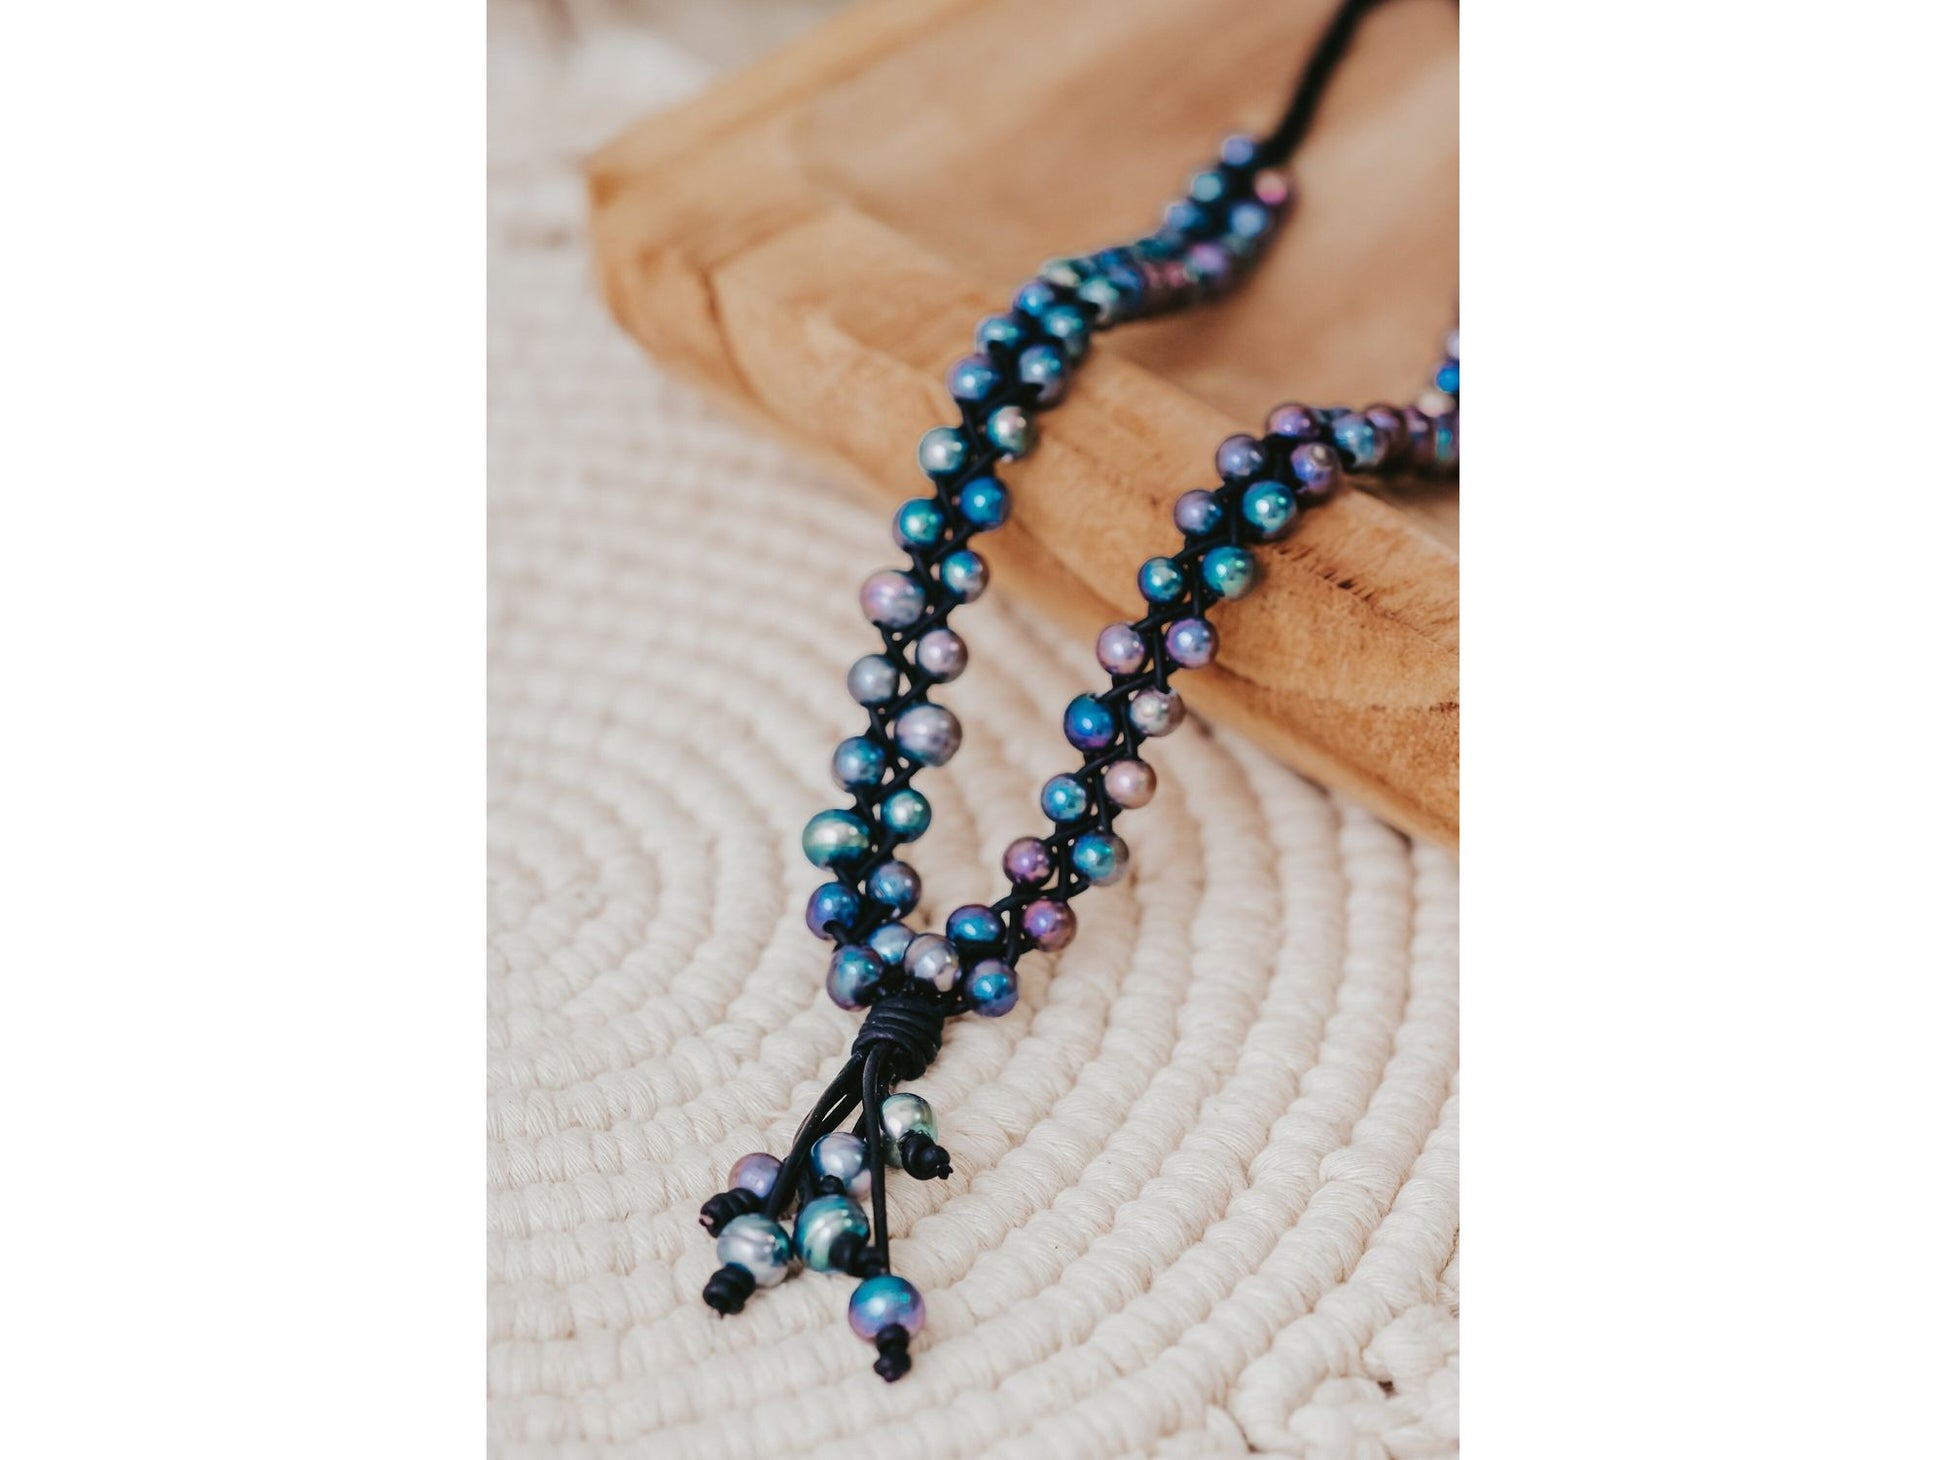 Braided Leather Necklace with Peacock Pearls